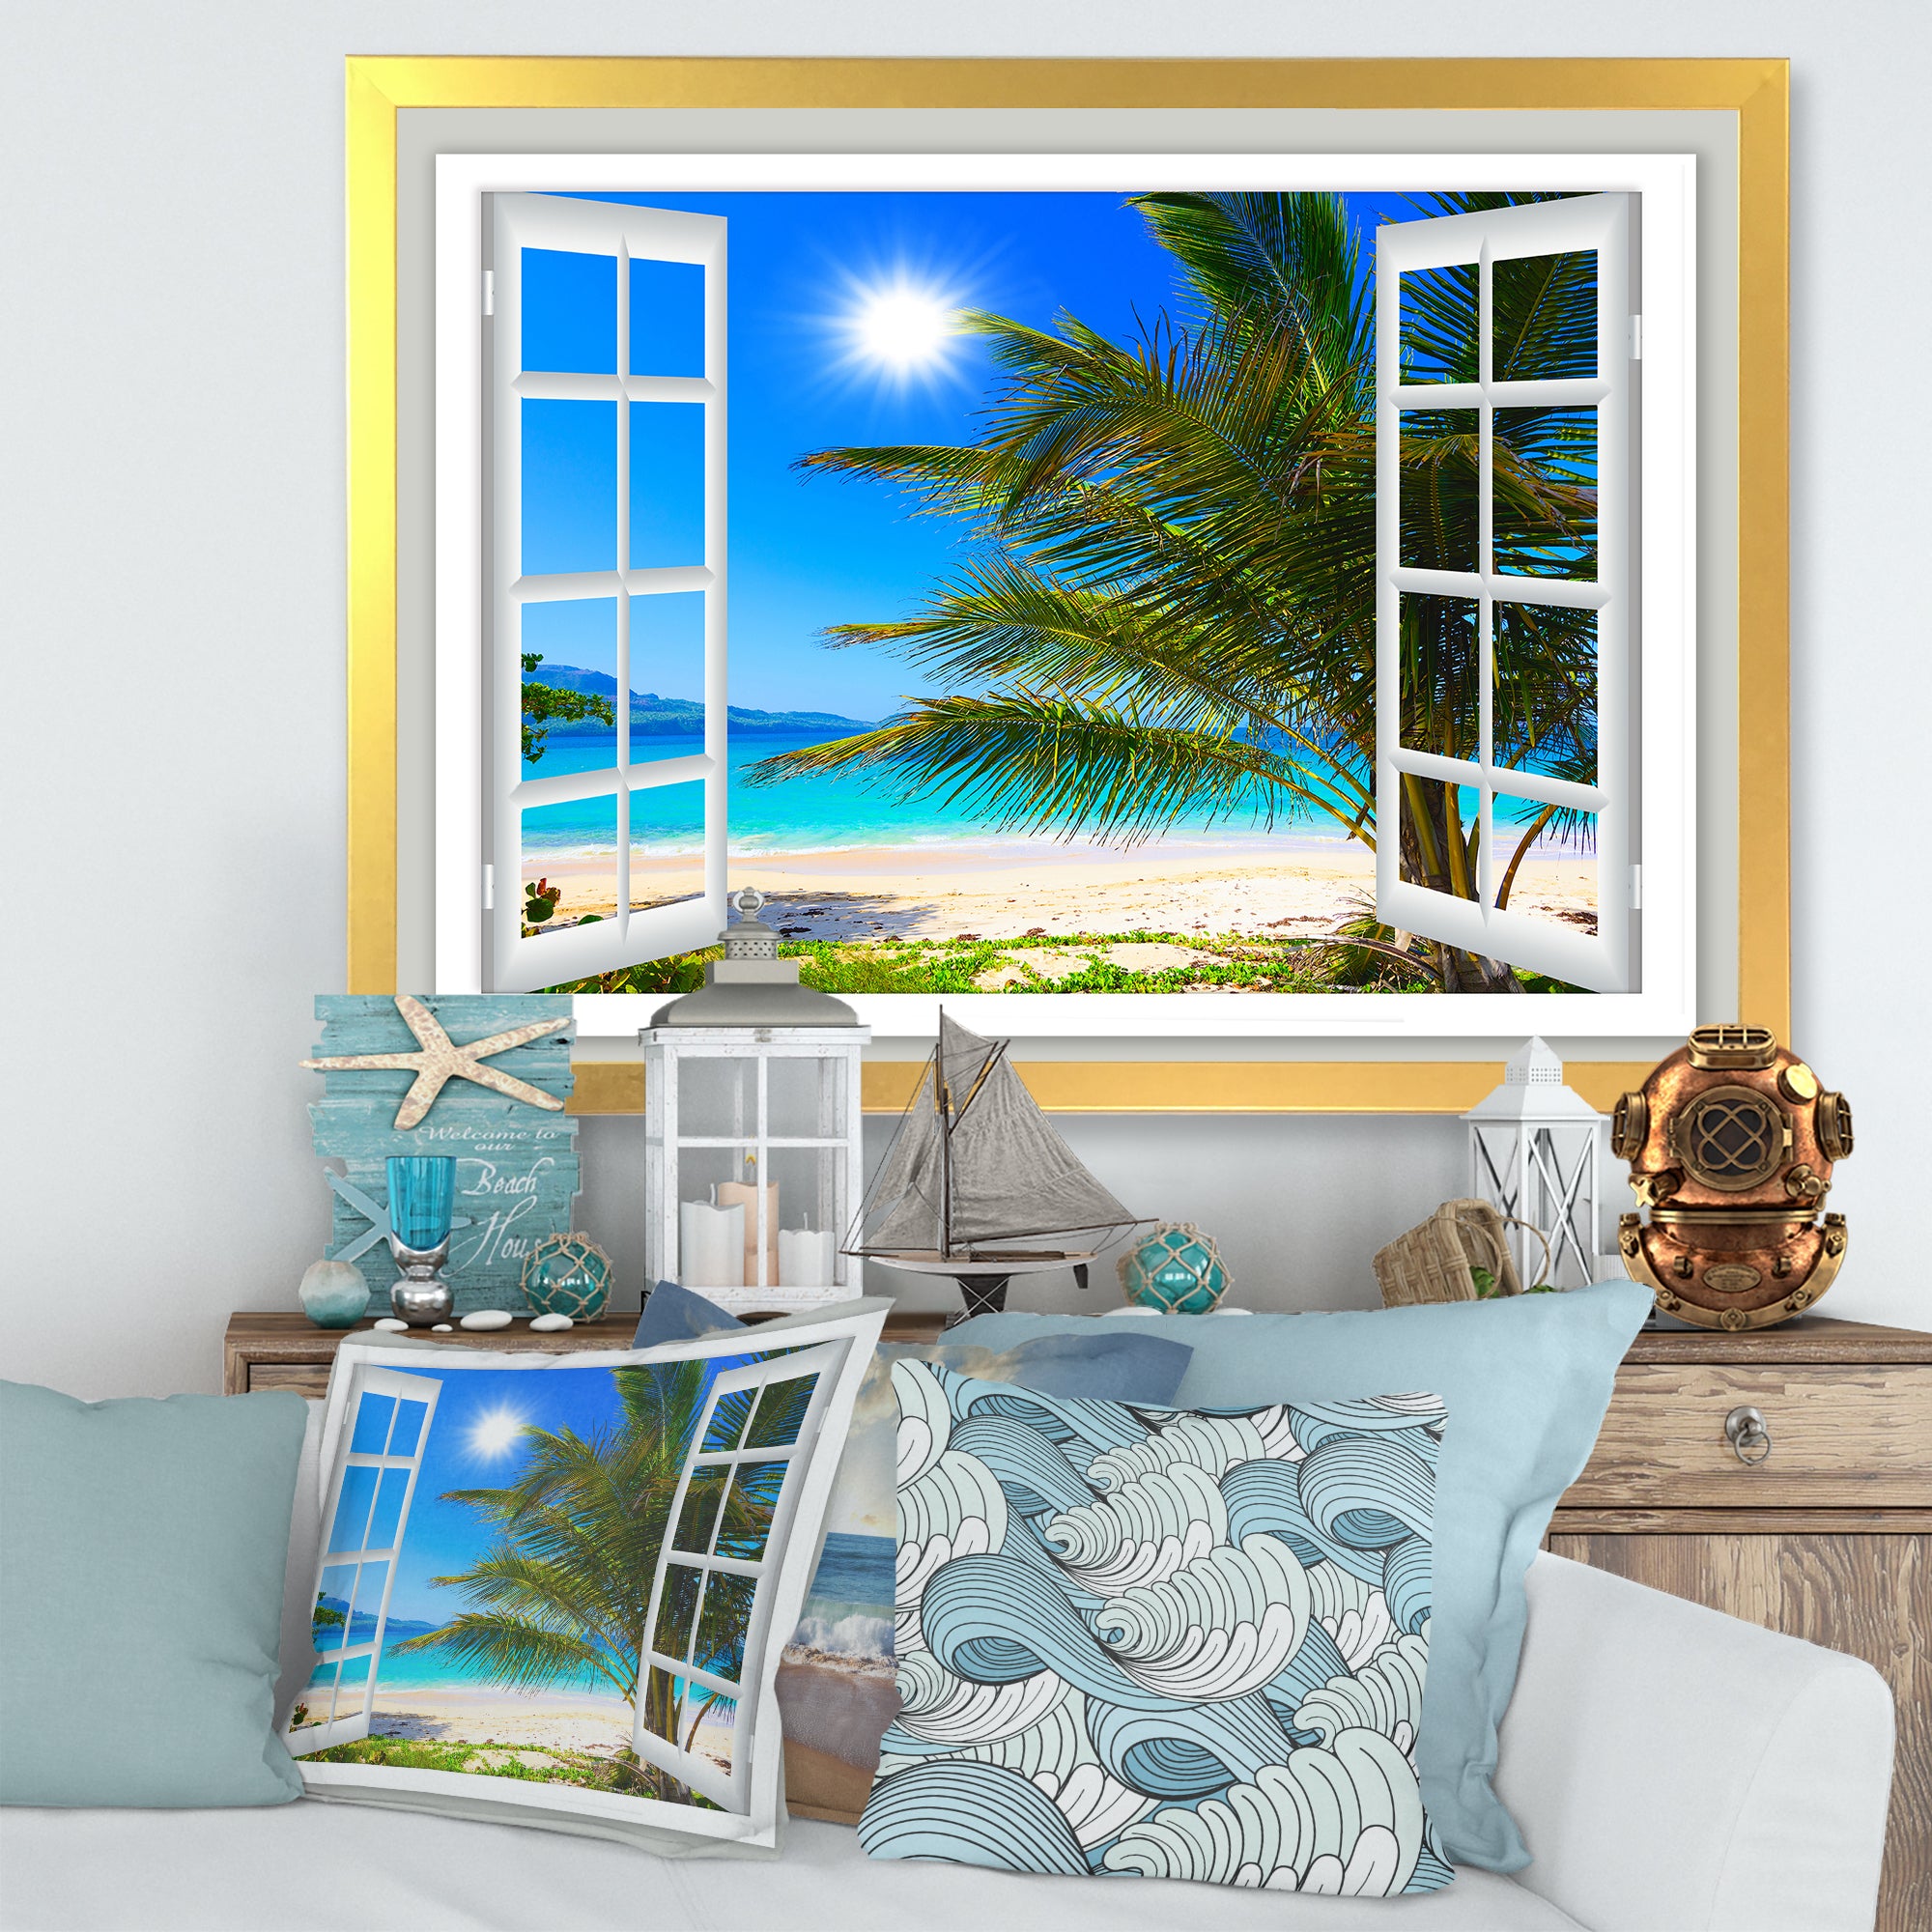 Window Open to Beach with Palm